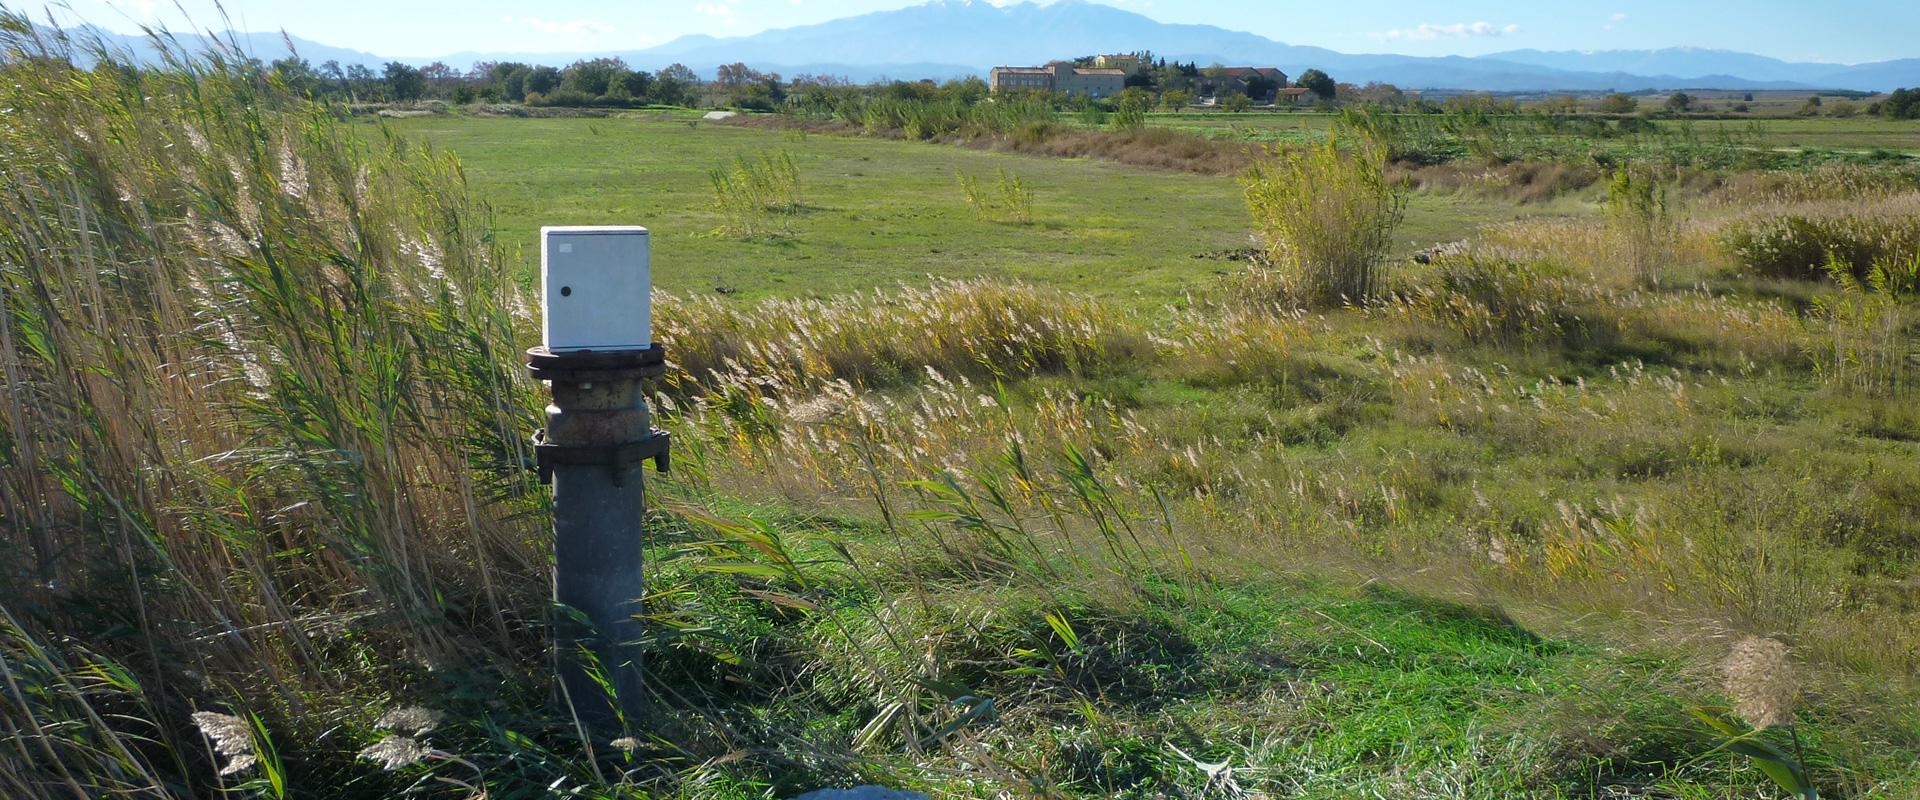 Groundwater monitoring network, Pyrénées Orientales